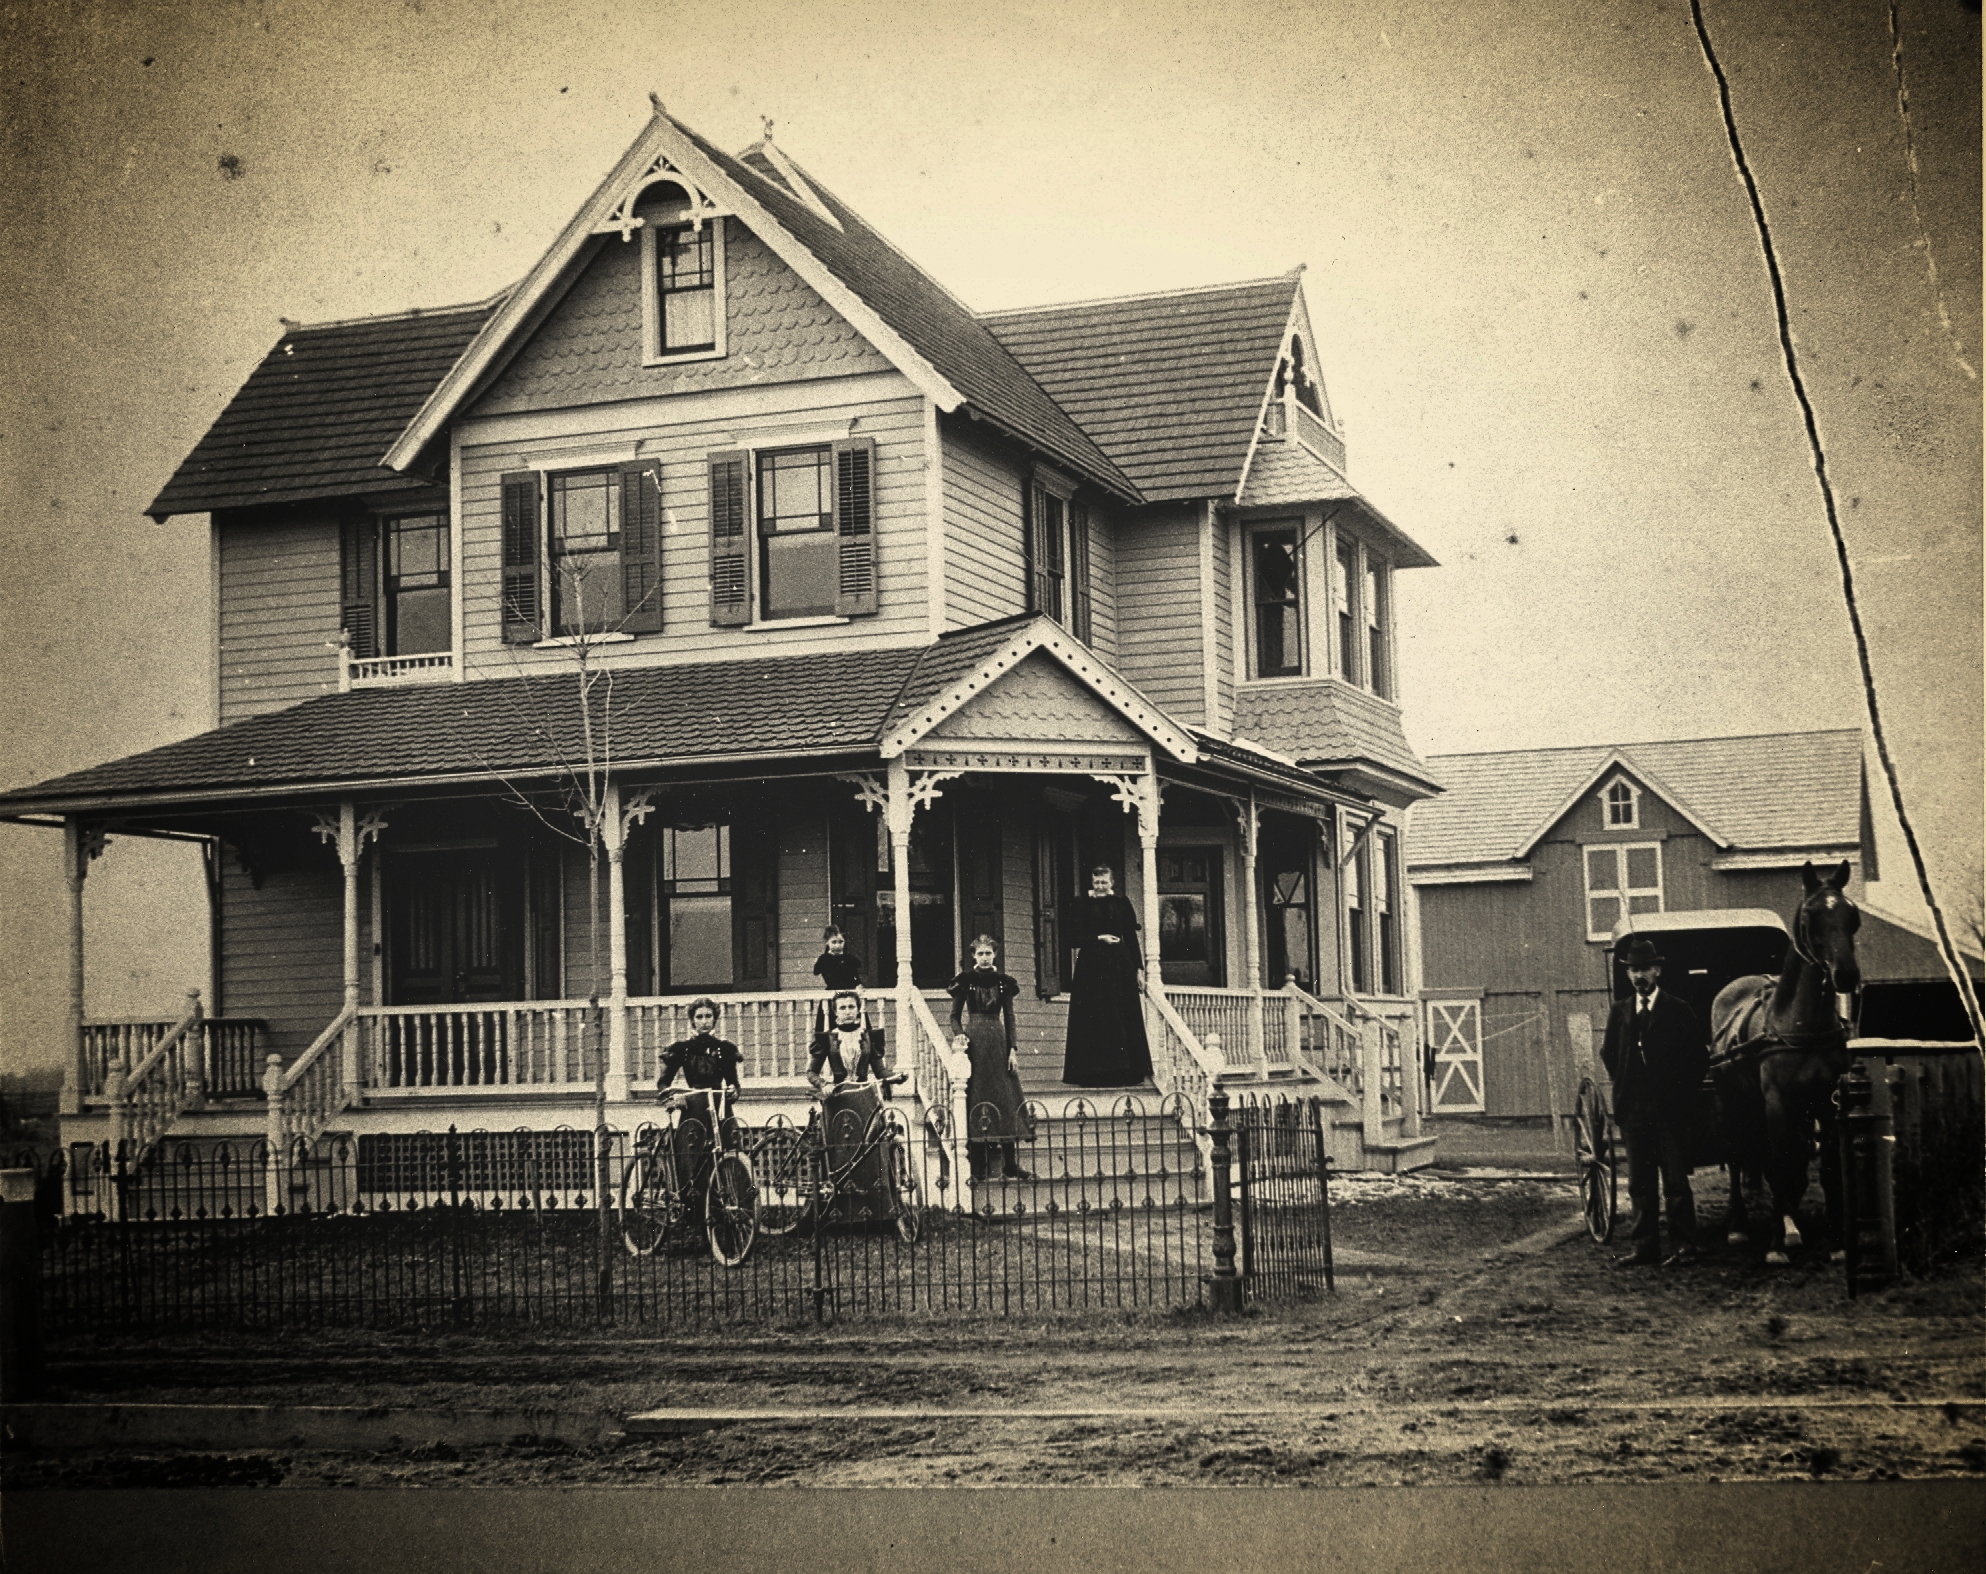   Avis House, South Main Street, Mullica Hill, c1900.The Avis House stands at the southern end of “Quaker Row,” the group of houses south of Spicer Street, so called because they all belonged to Quaker families. [HTHS]  